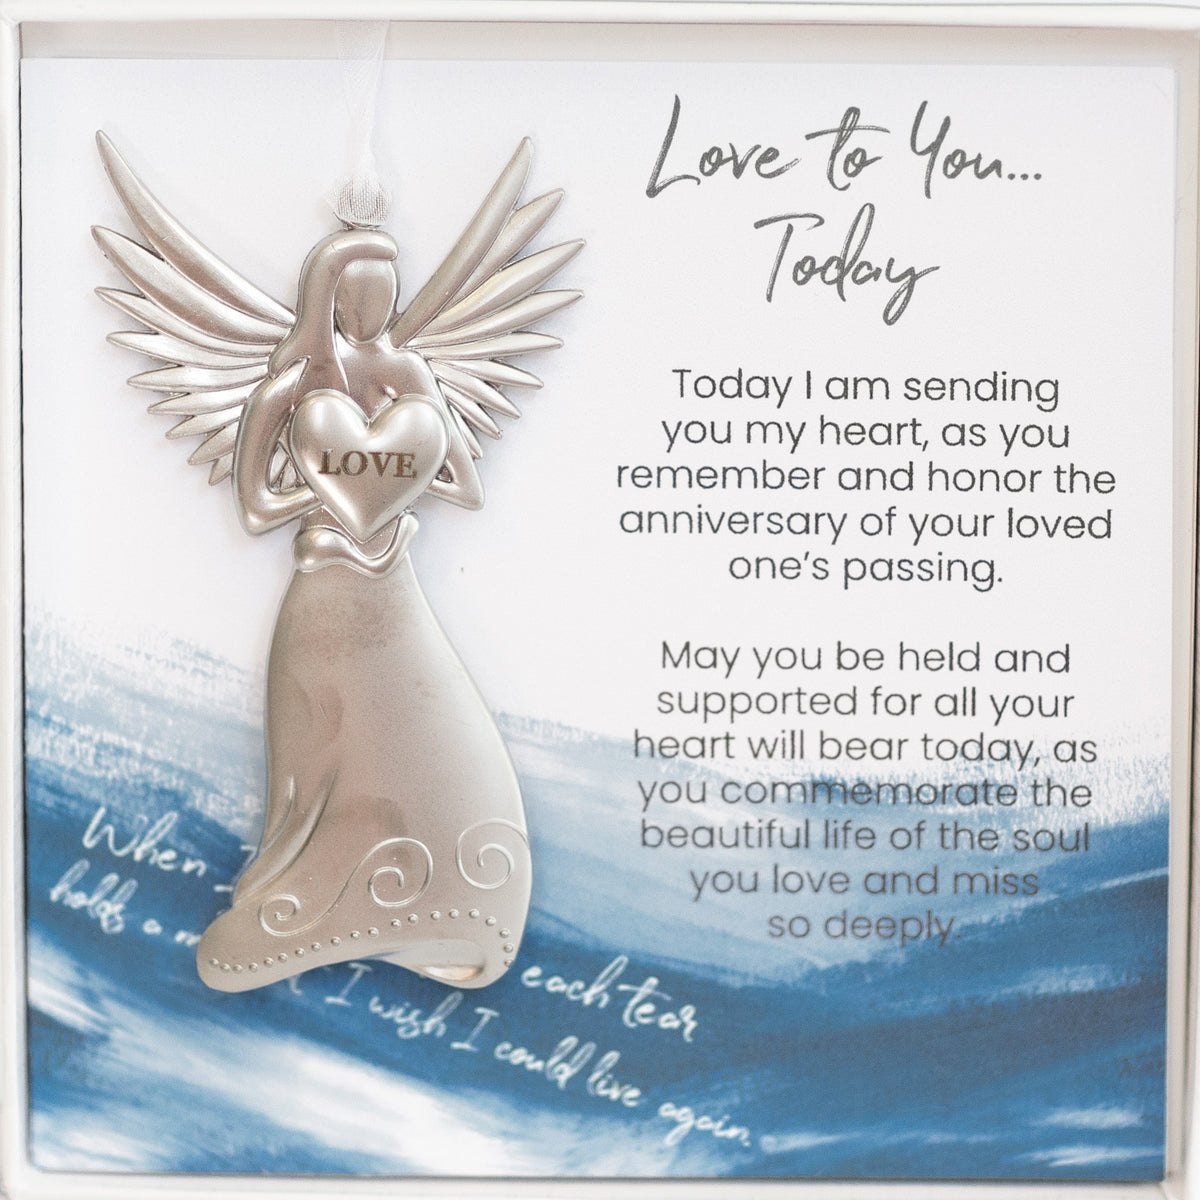 4" Metal Hanging Angel Boxed with Sentiment Card that Offers Comfort and Remembrance on the Anniversary of a Loved Ones Passing, Gift Boxed with Clear Lid